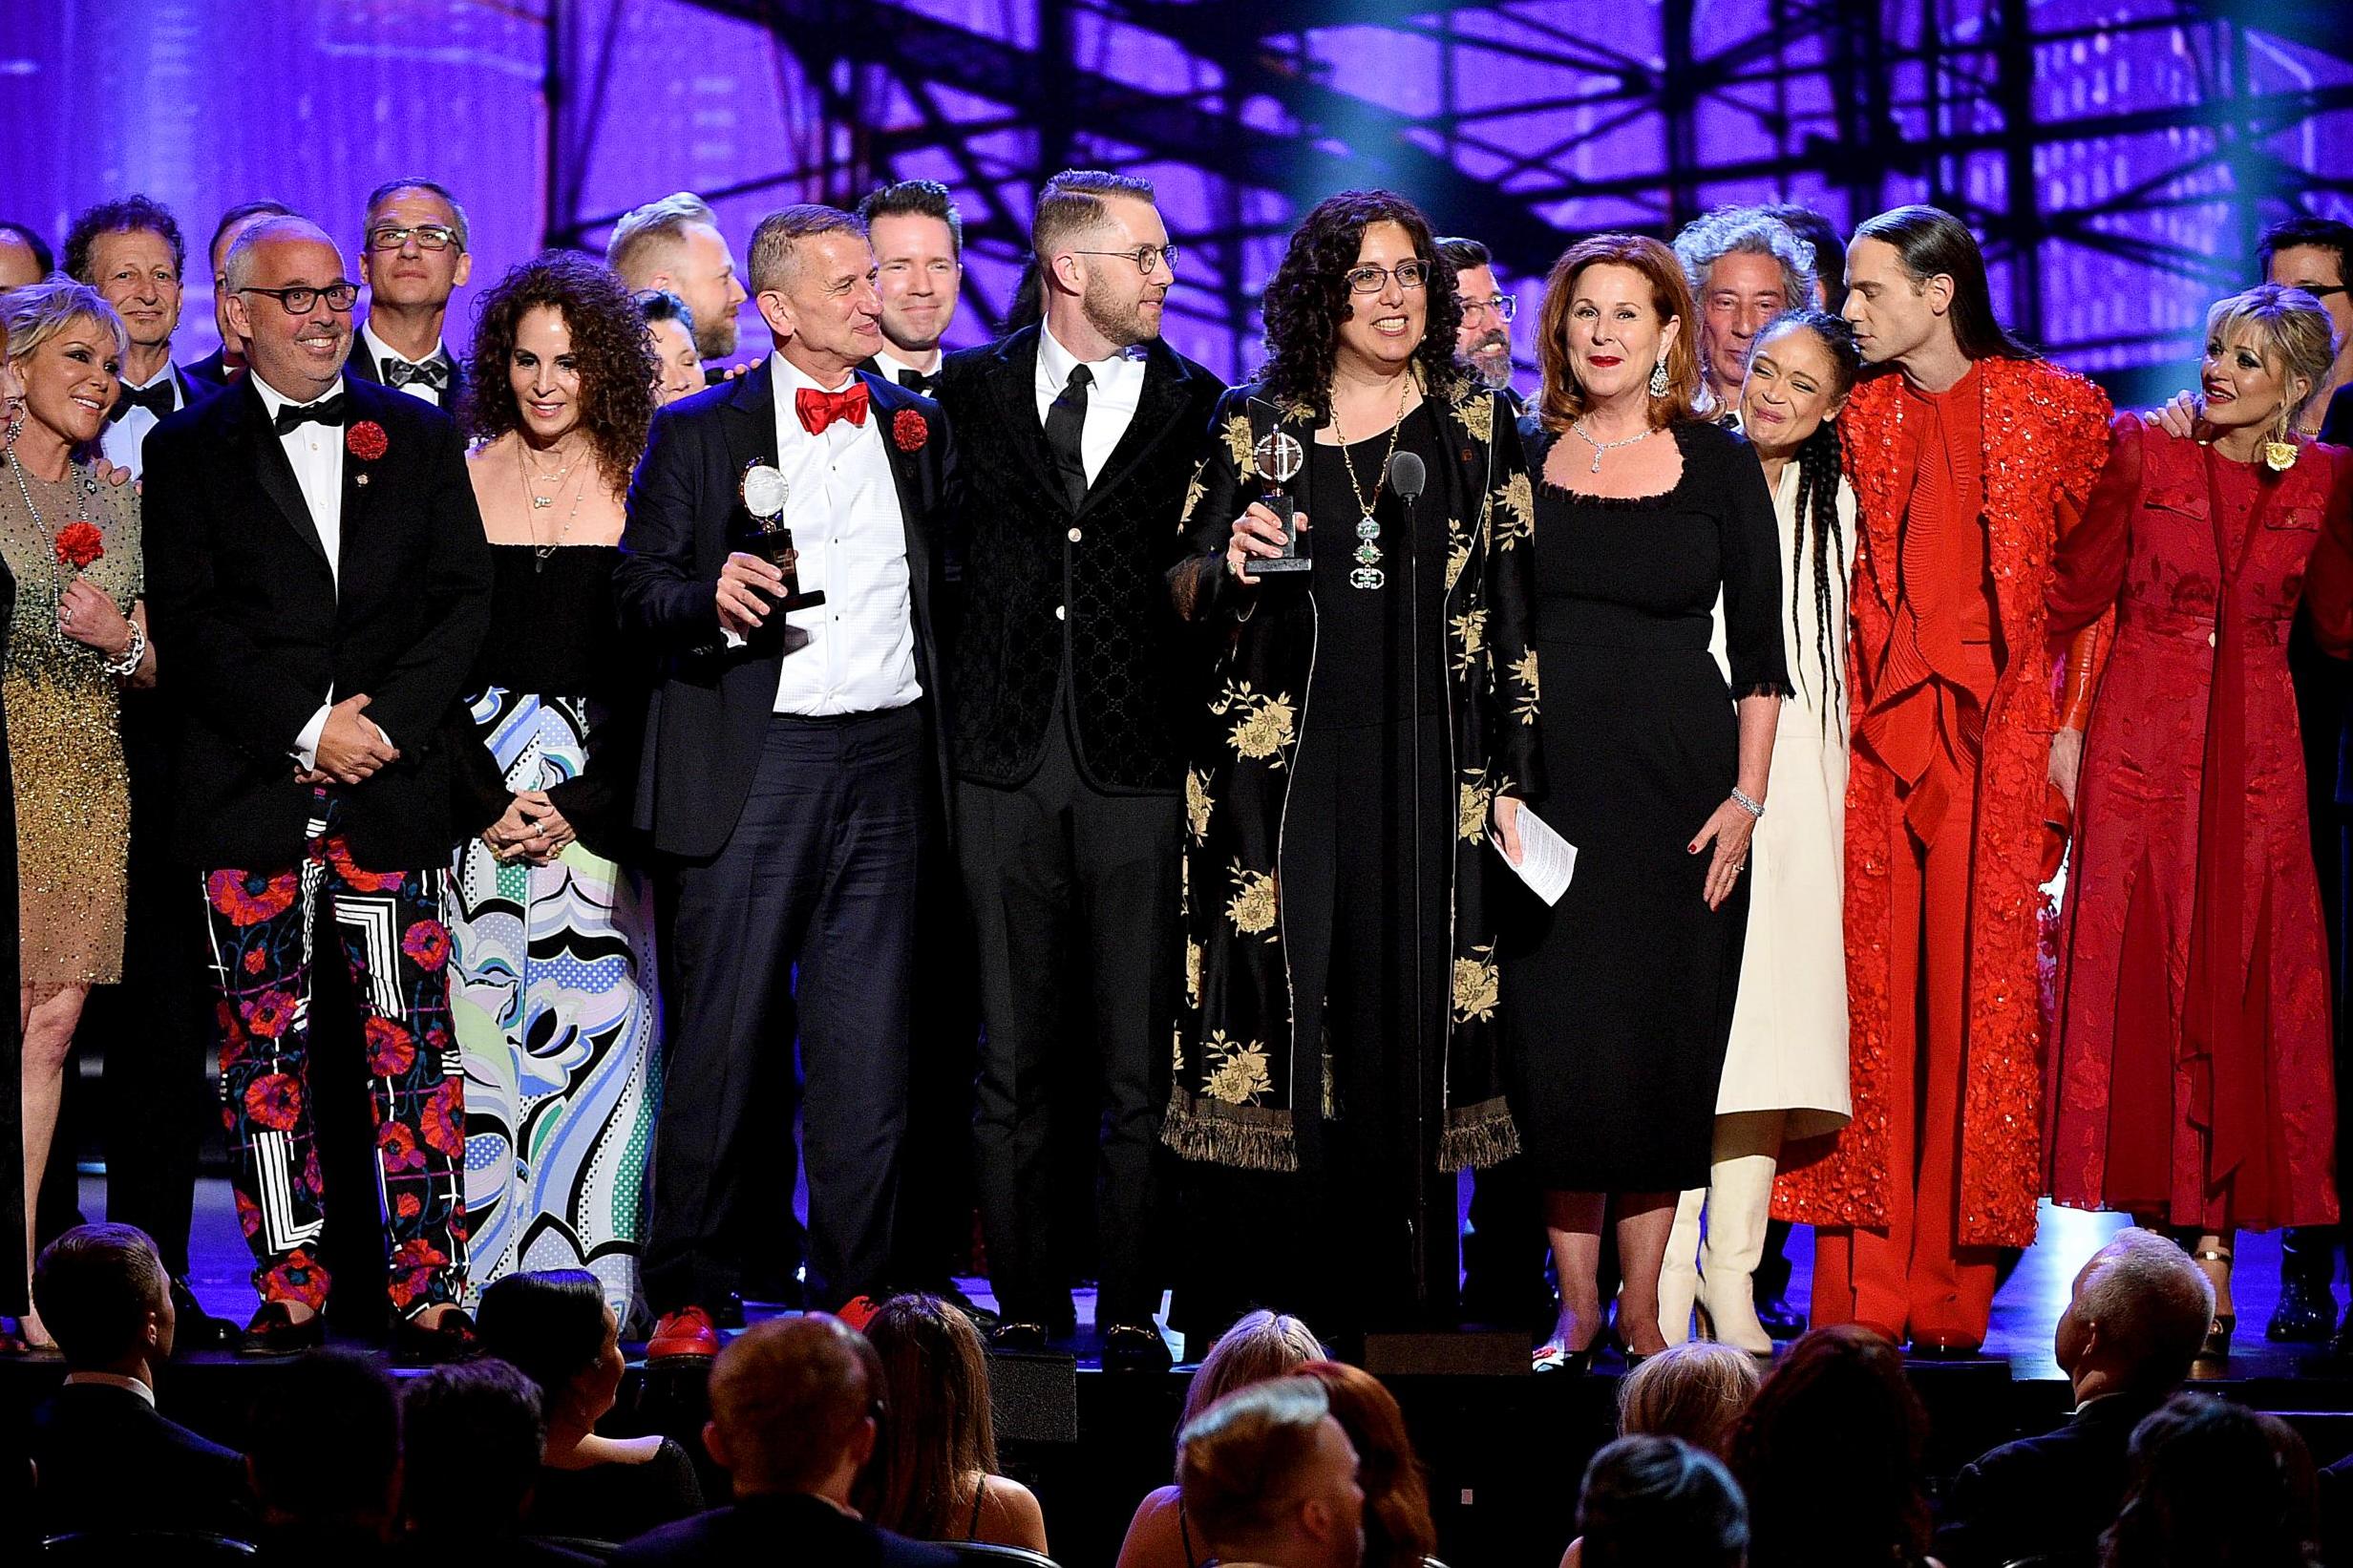 The cast and crew of Hadestown accept the award for best musical during the 2019 Tony Awards at Radio City Music Hall on 9 June, 2019 in New York City.